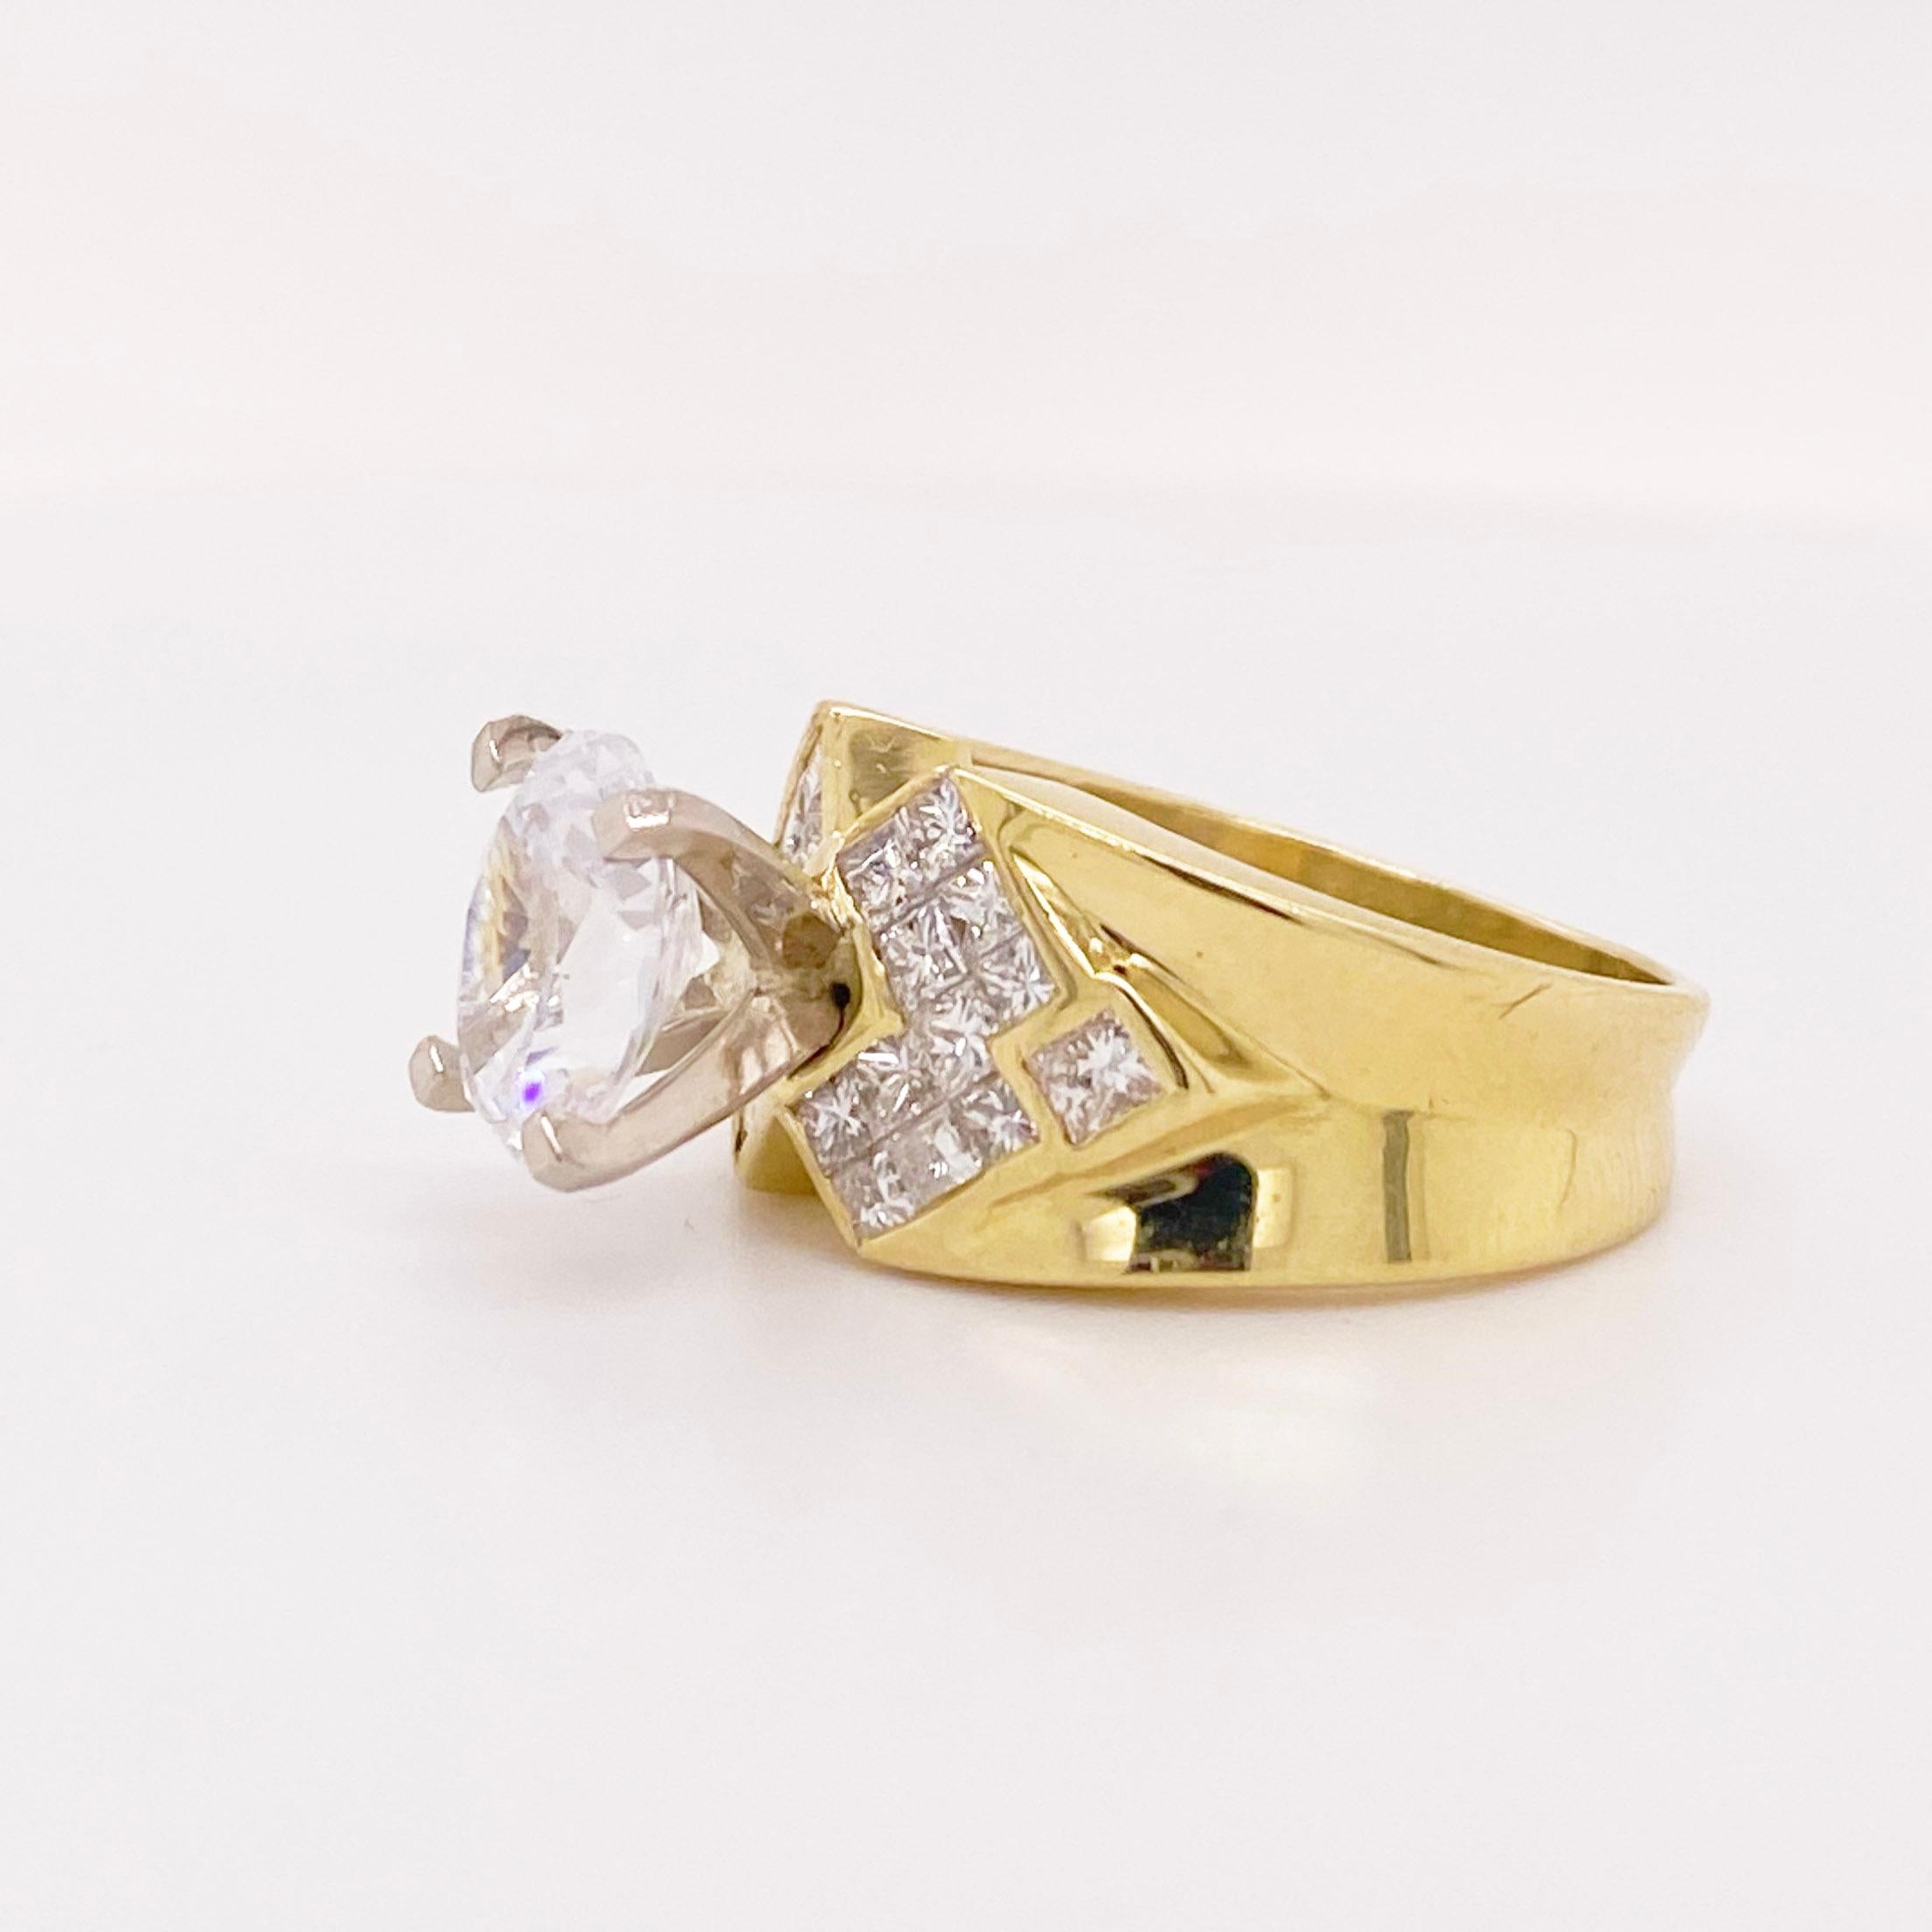 If you're looking for a unique semi-mount engagement ring, you've found the one! The beautiful mix of the yellow gold ring and white gold prongs is an elegant combination! The accent diamonds are gorgeous princess cuts in a stylish pattern for a